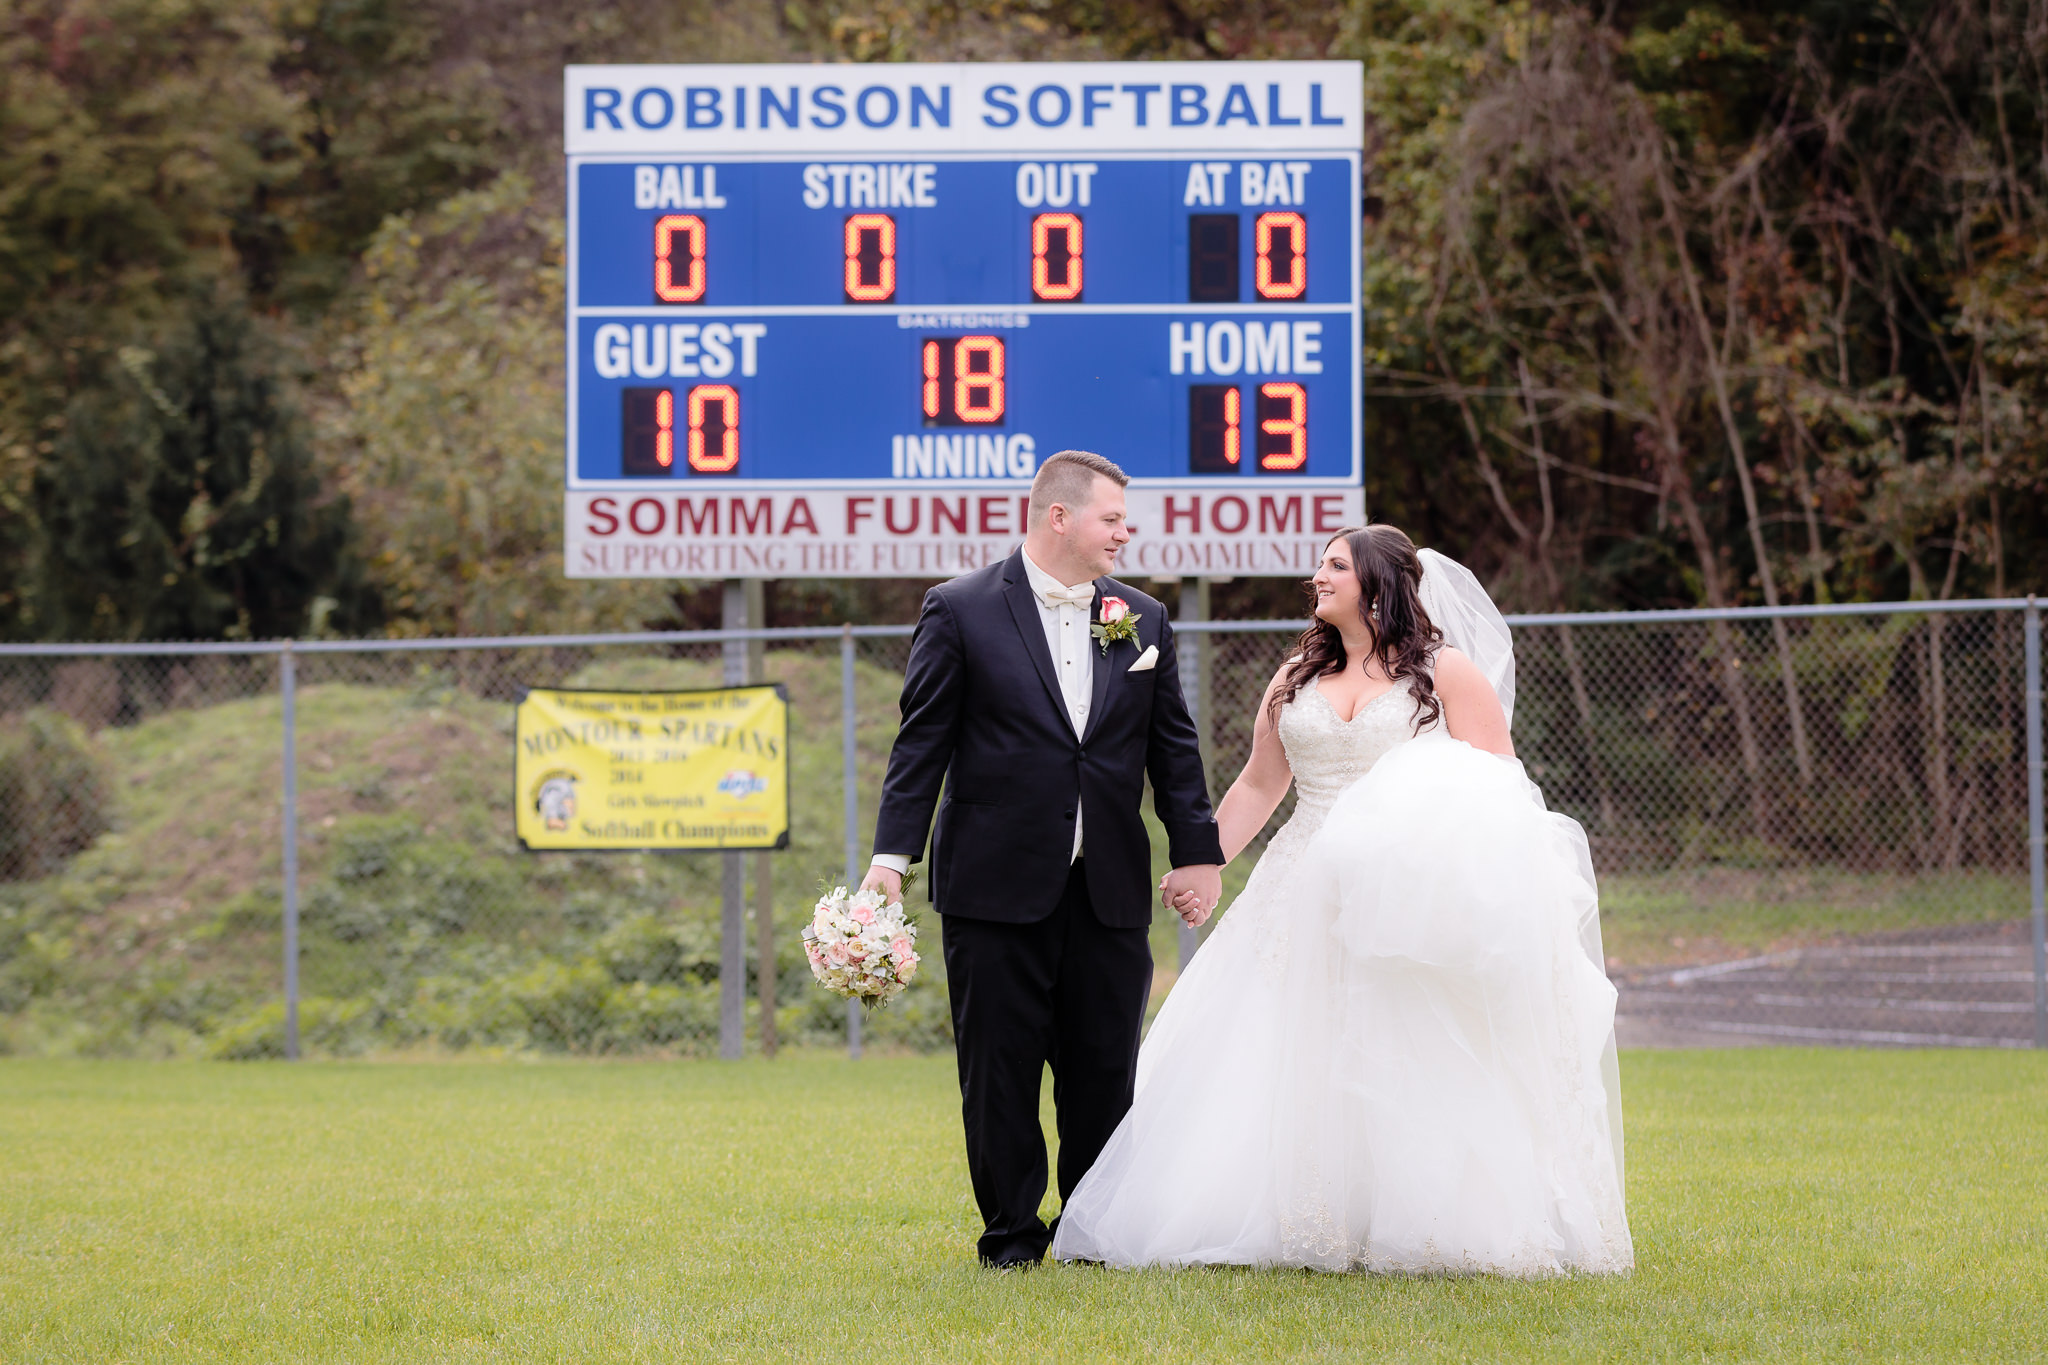 Newlyweds walk in the outfield of the Robinson Township Girls Softball field